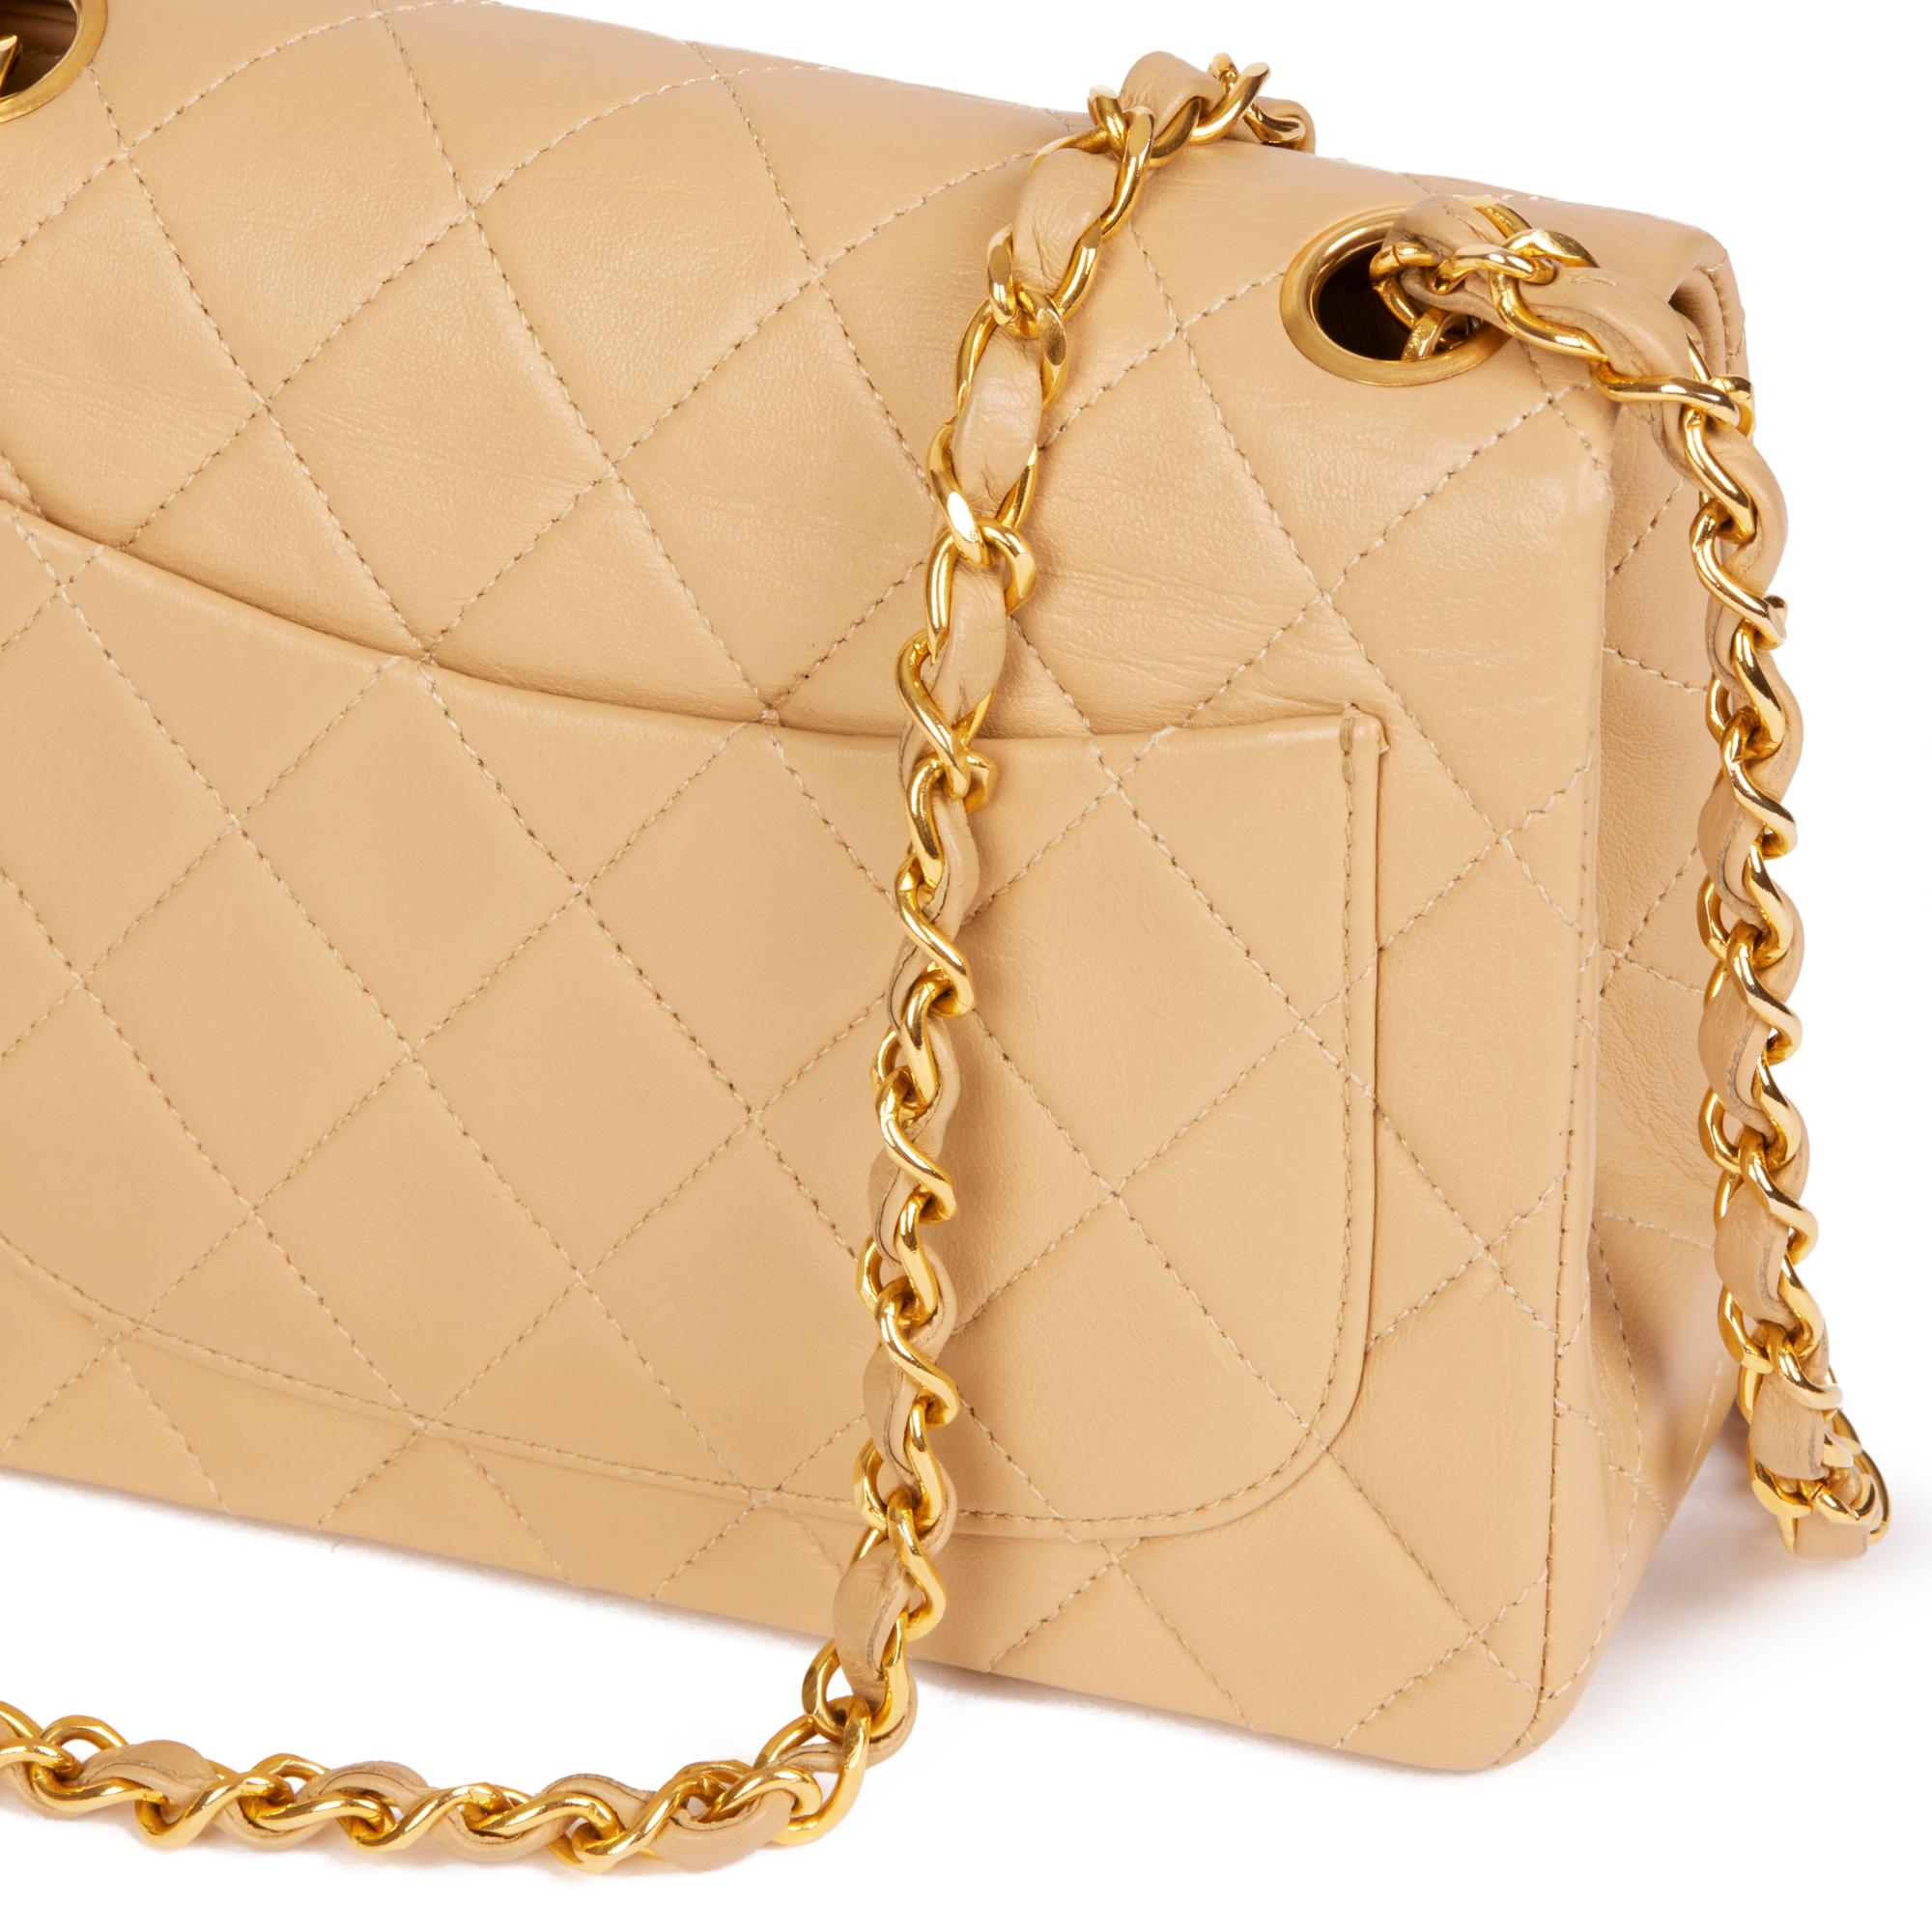 CHANEL Beige Quilted Lambskin Vintage Mini Flap Bag 4